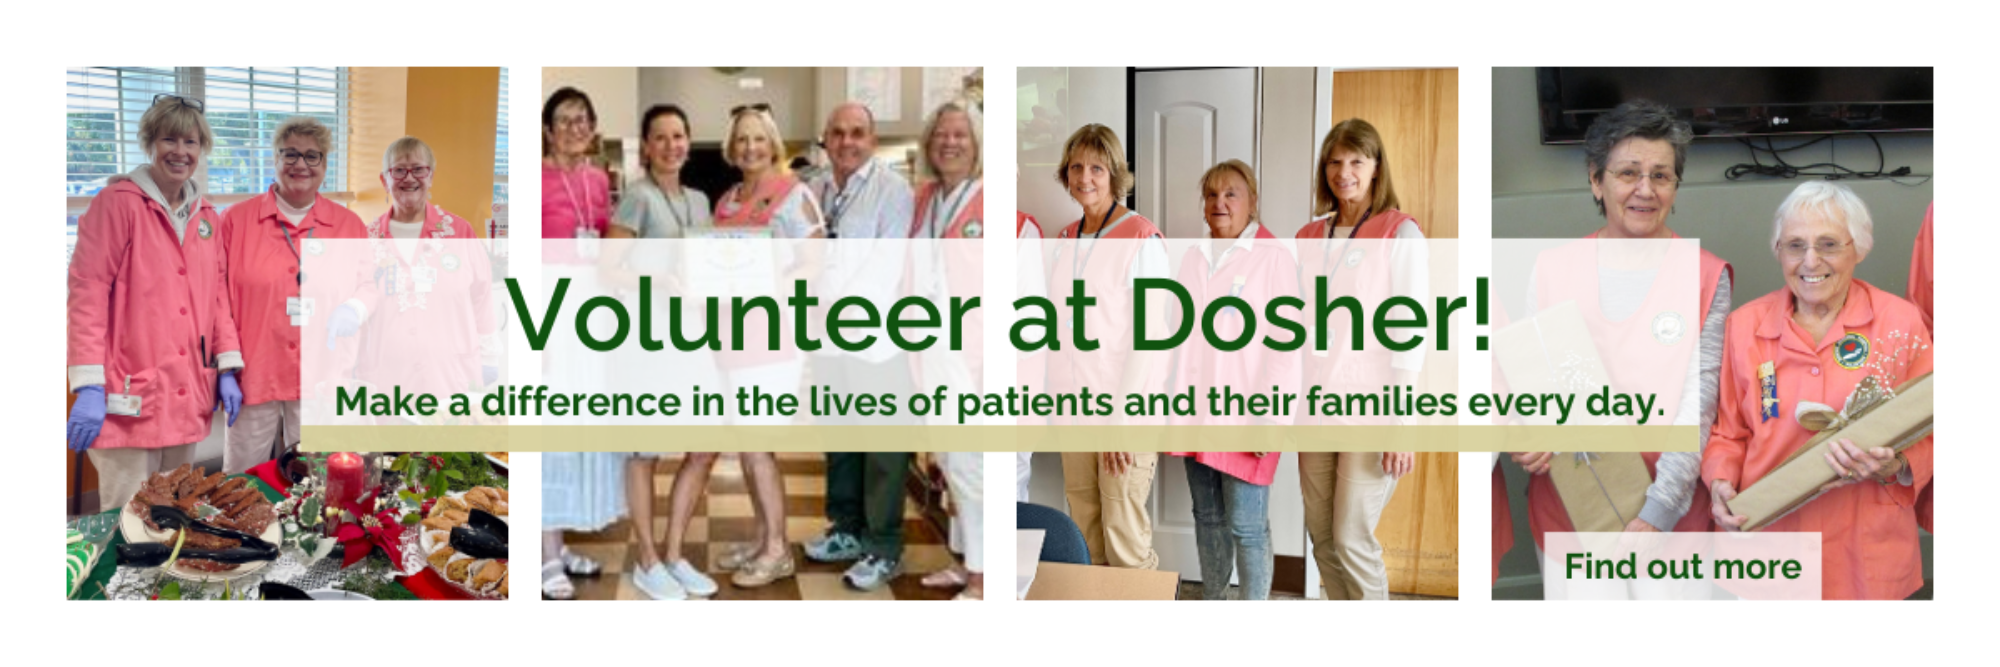 Volunteer at Dosher!
Make a difference in the lives of patients and their families every day.